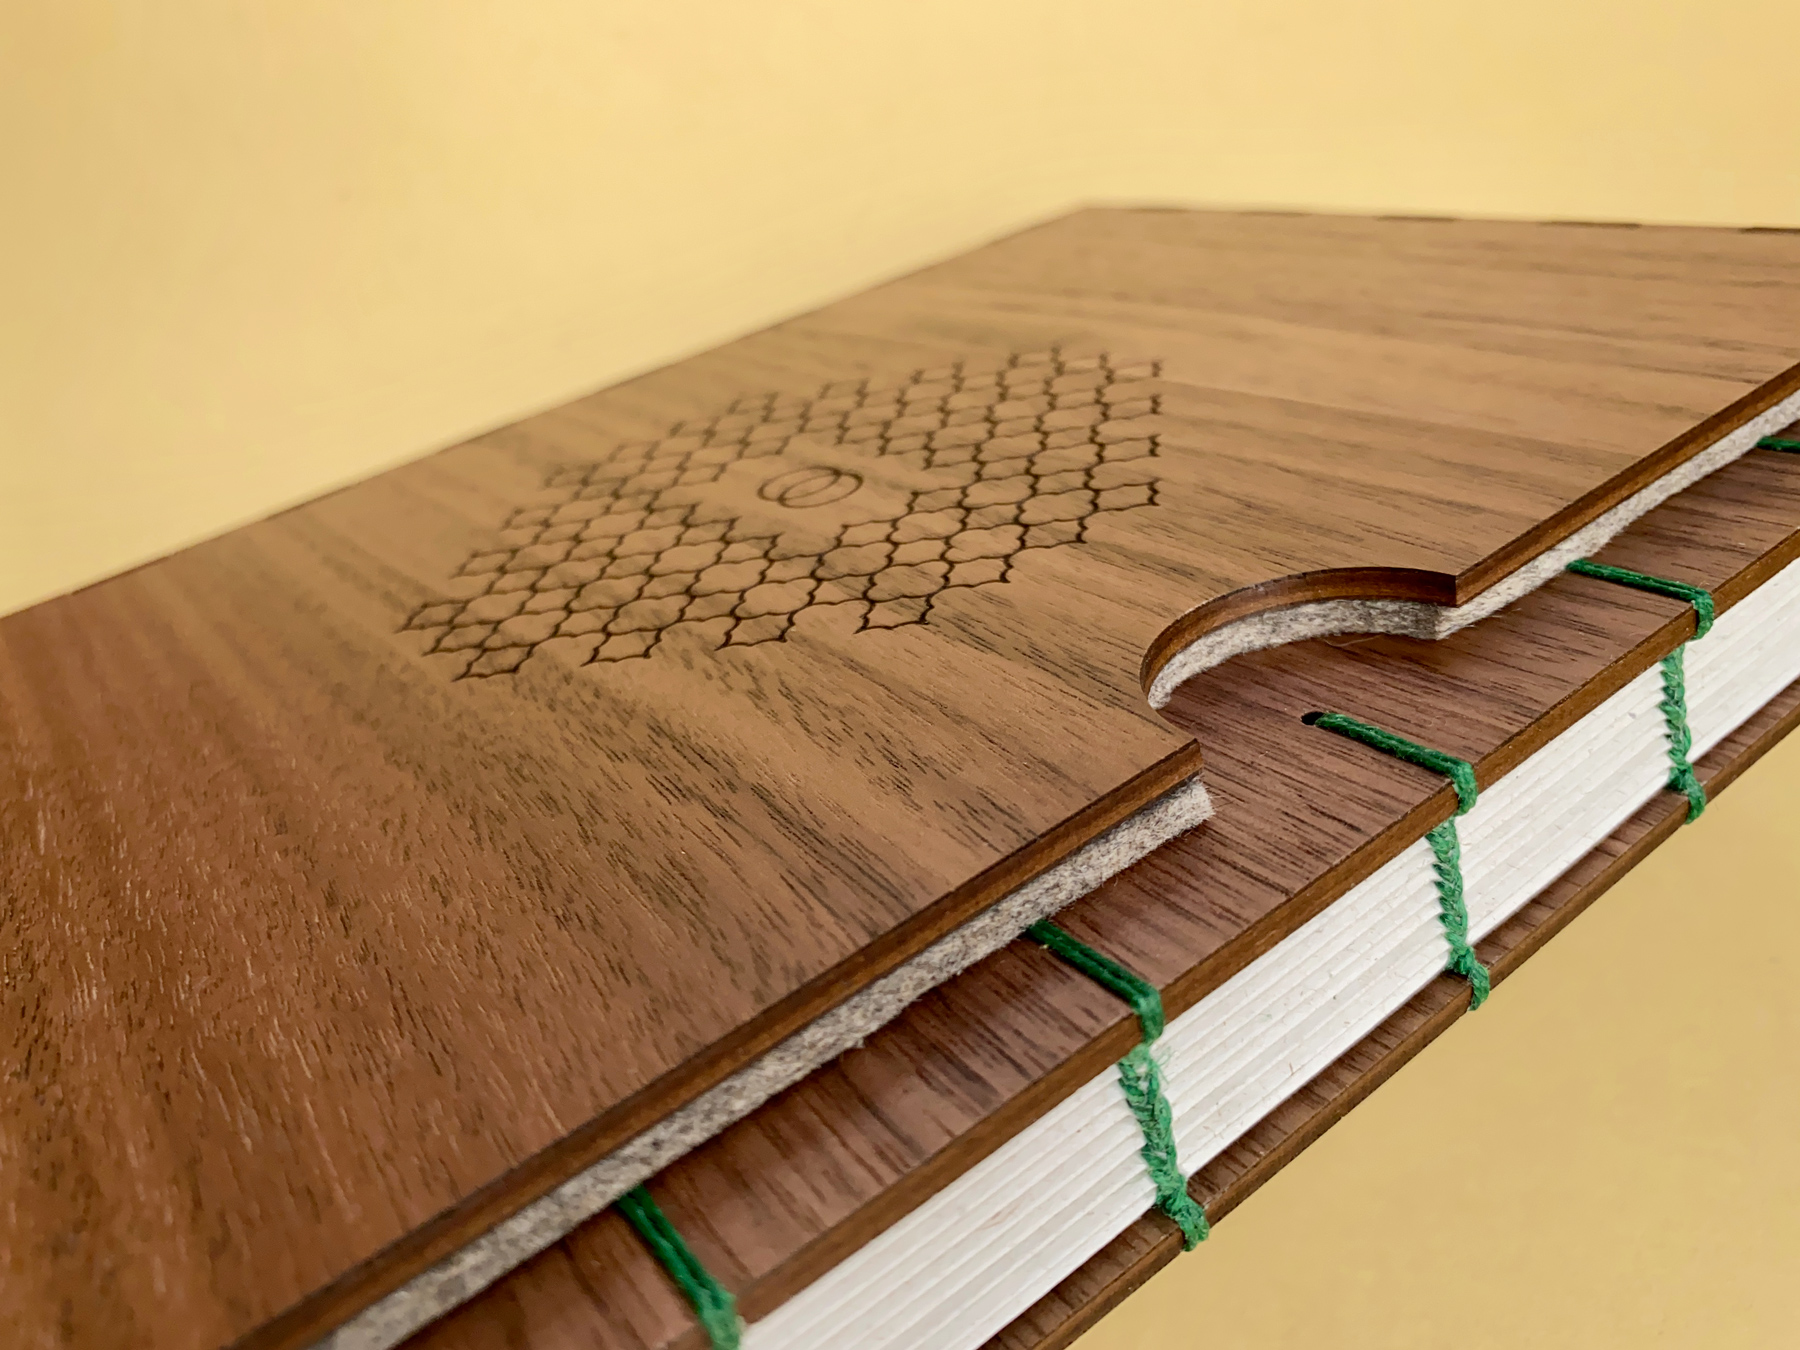 A 40th birthday Fondfolio we made last month. The book has a walnut cover and a custom walnut slipcase. It’s bound with moss green linen thread and is laying across a pale yellow background.